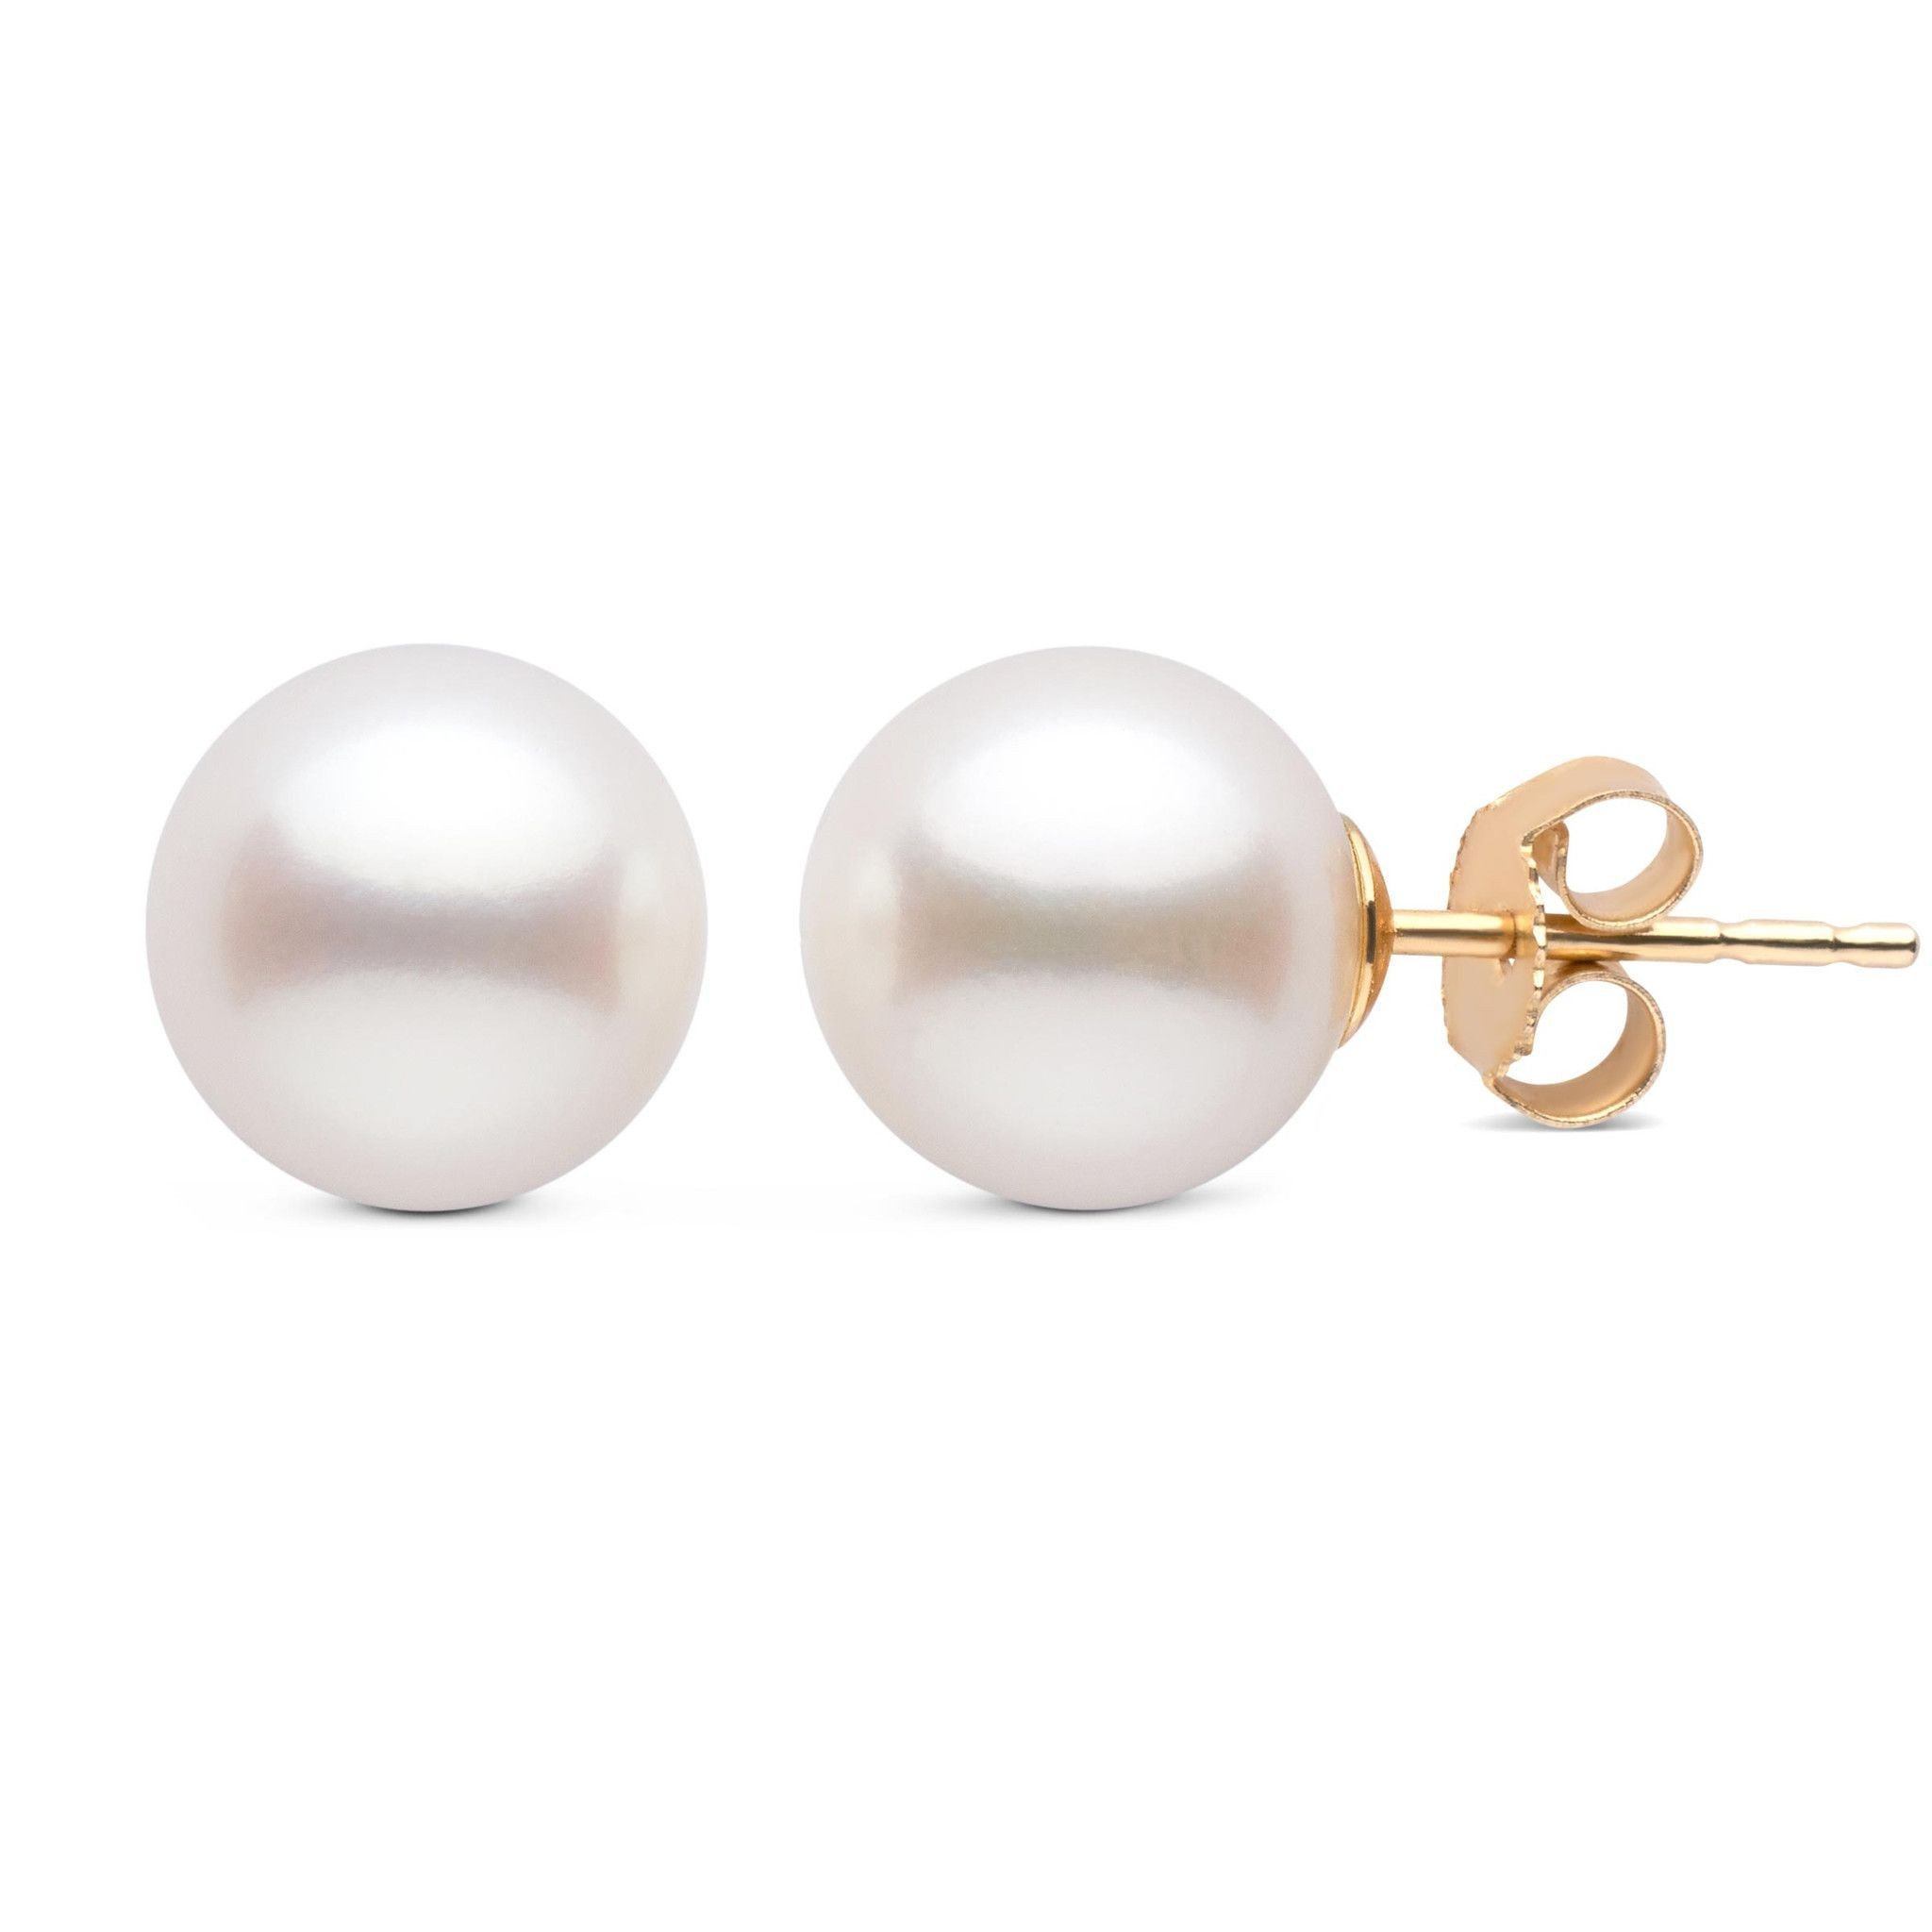 Large Freshwater Pearl Earrings - White Pearls and Hypoallergenic Tita –  CATLOGIX